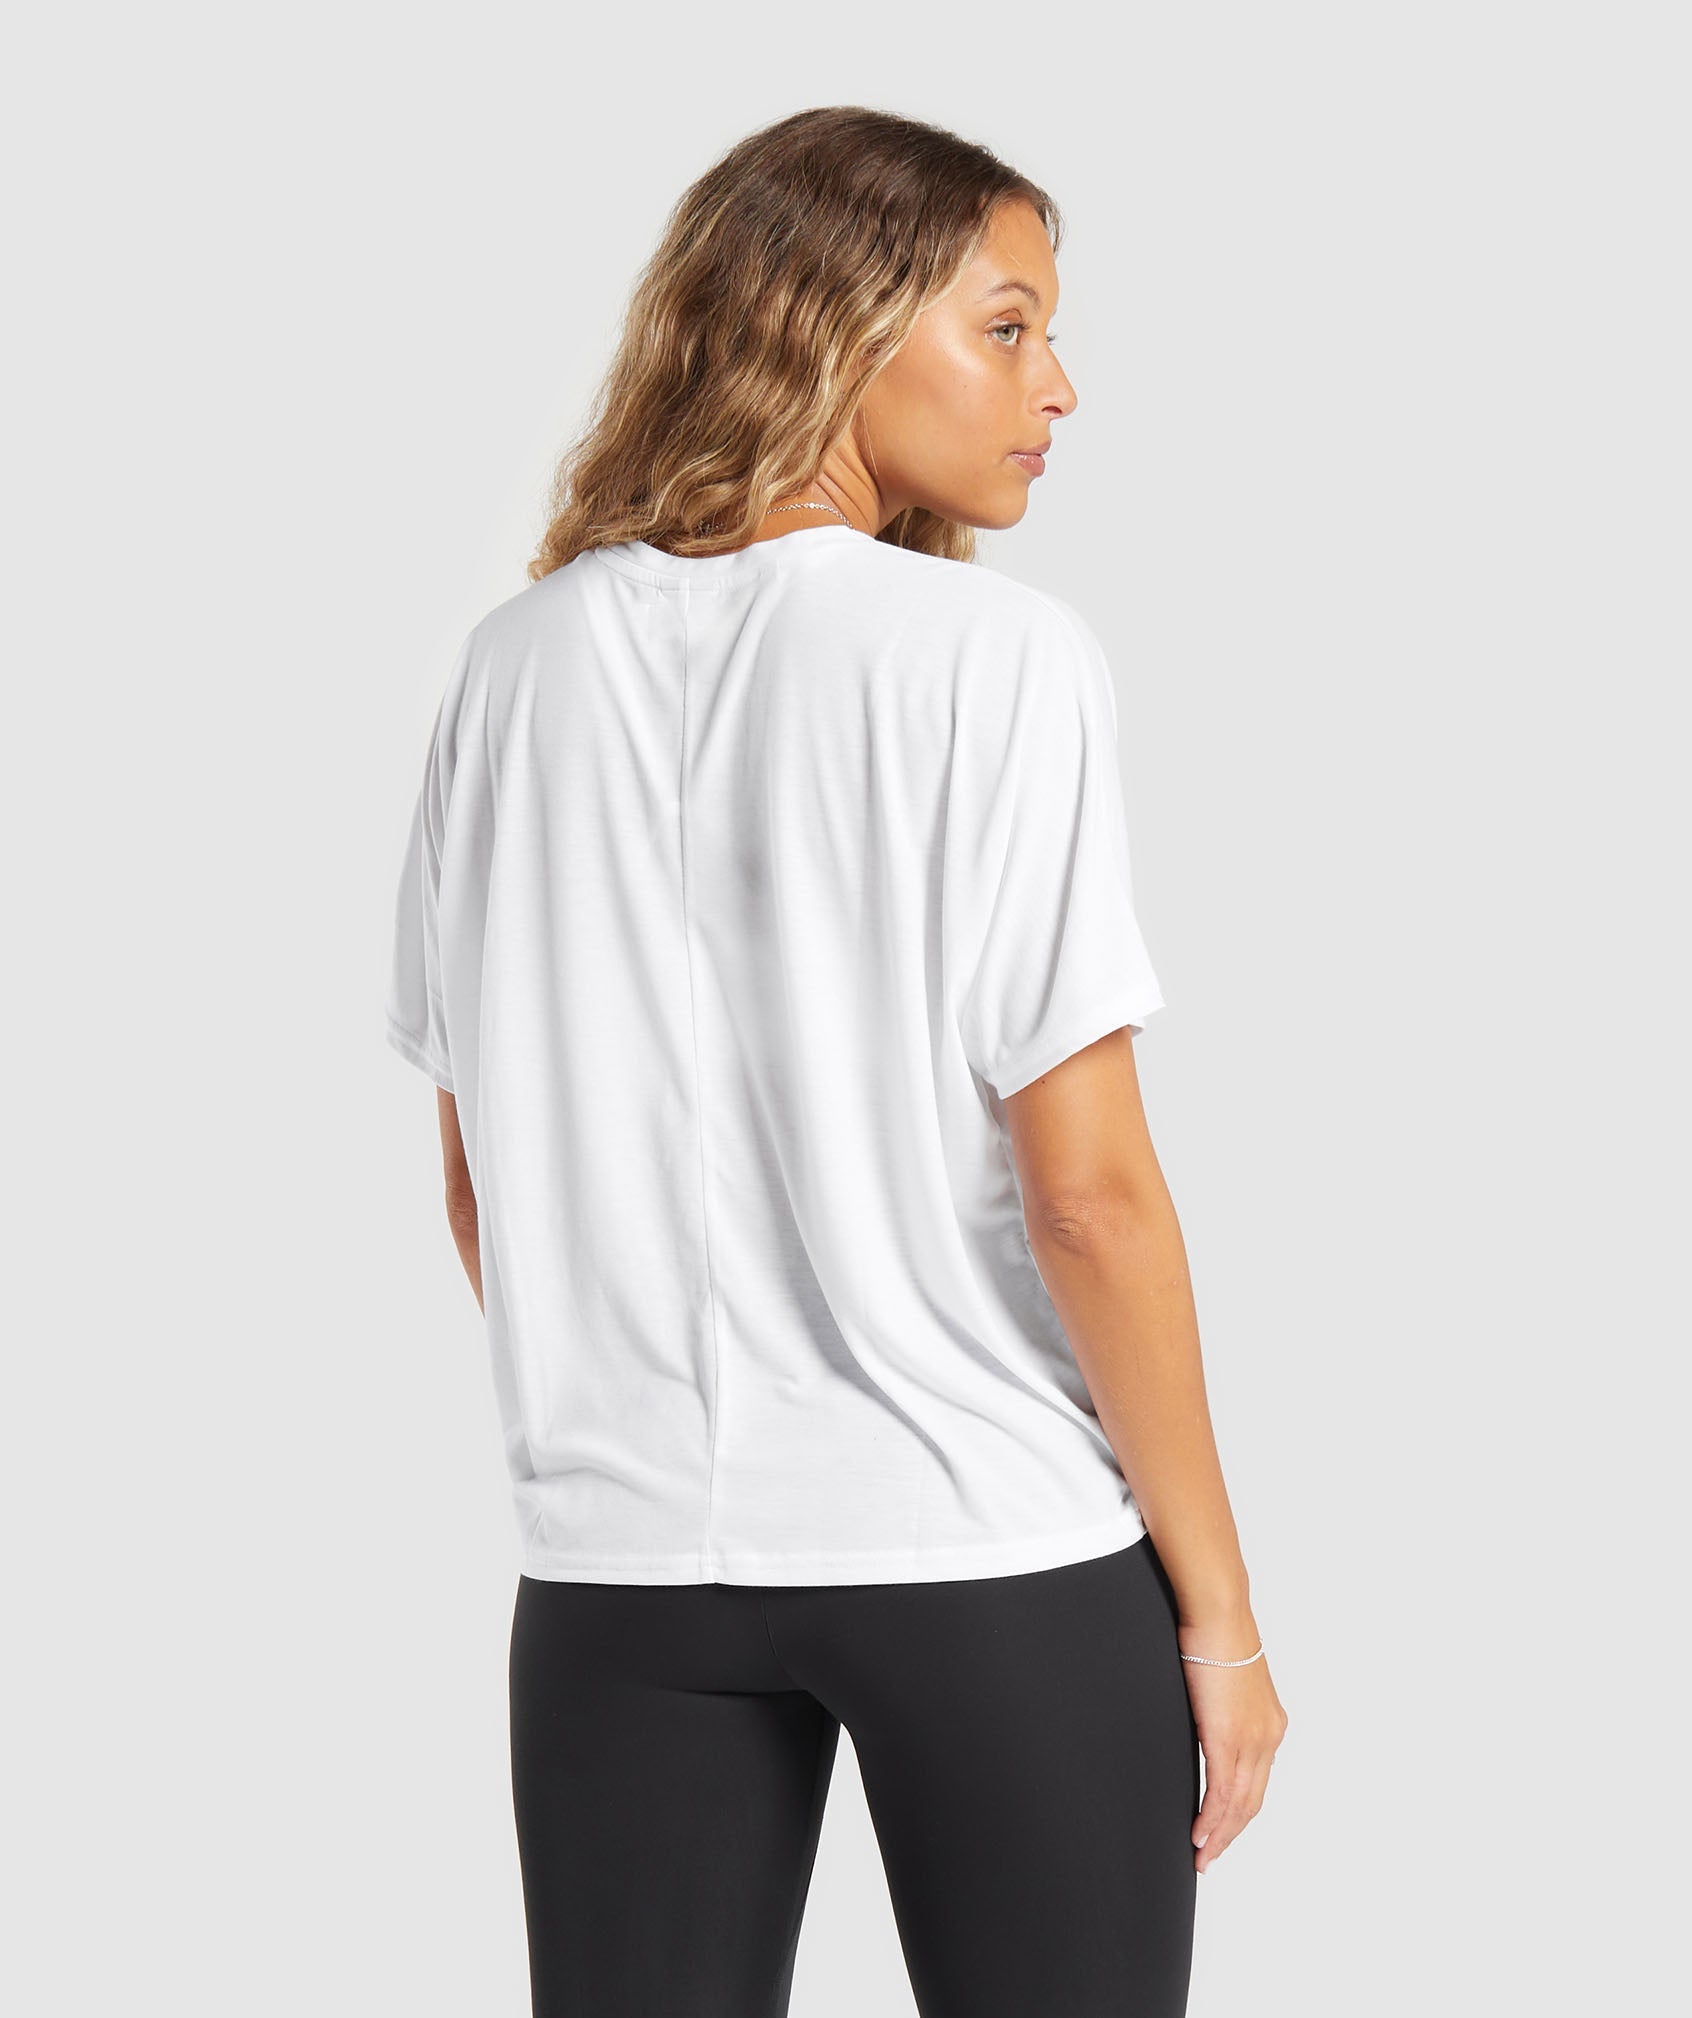 Super Soft T-Shirt in White - view 2